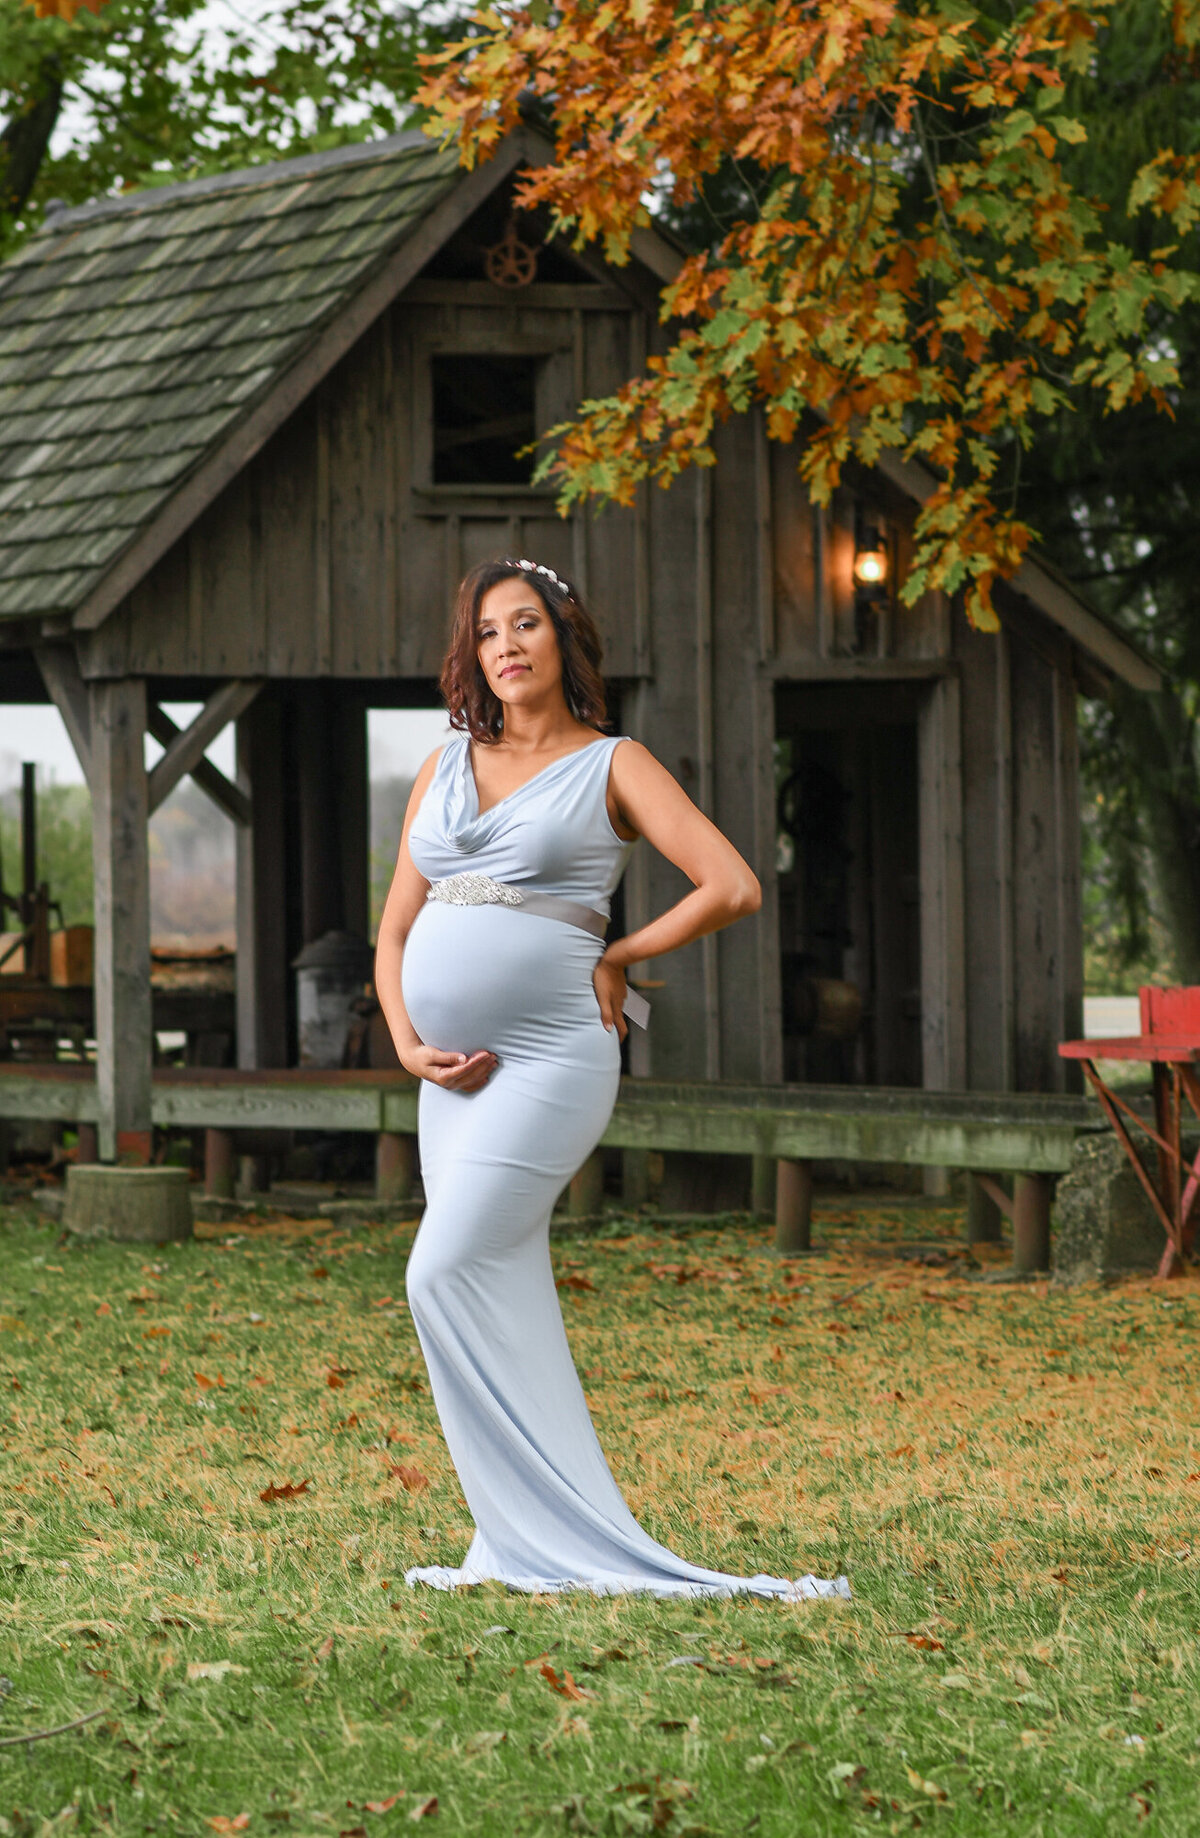 Pregnant woman in a beautiful long maternity gown outside by a rustic building